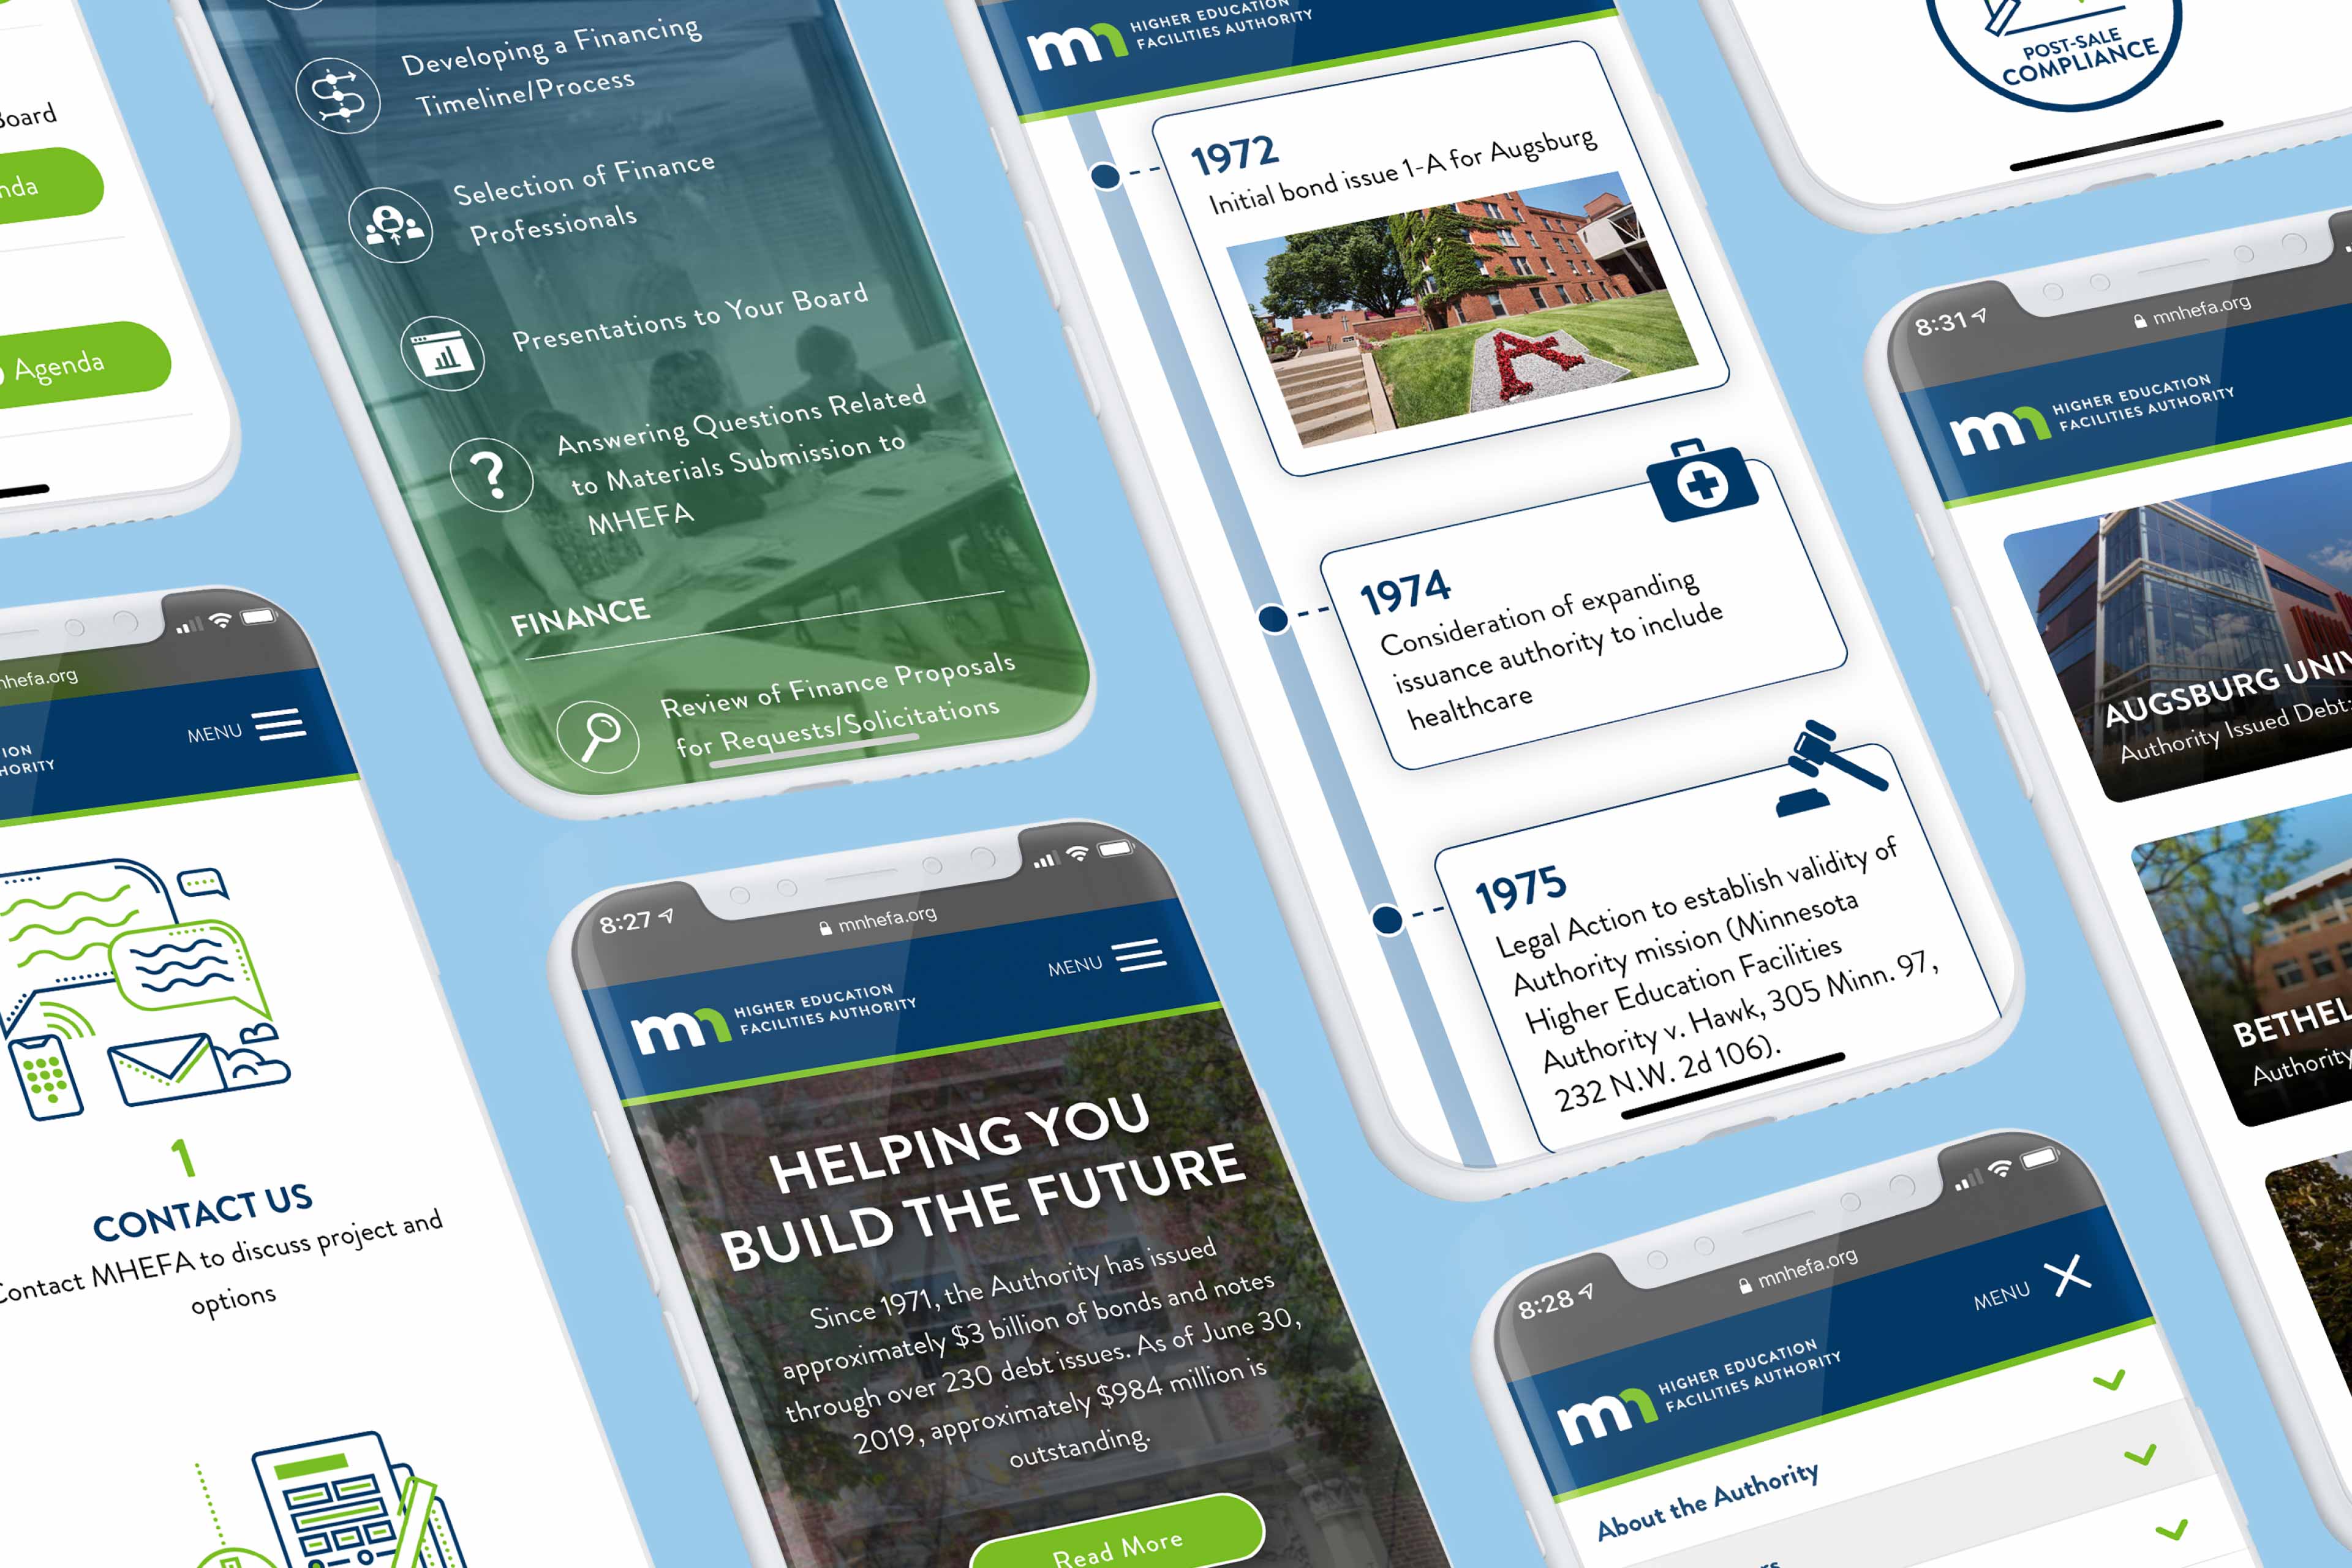 minnesota higher education facilities authority website on mobile devices